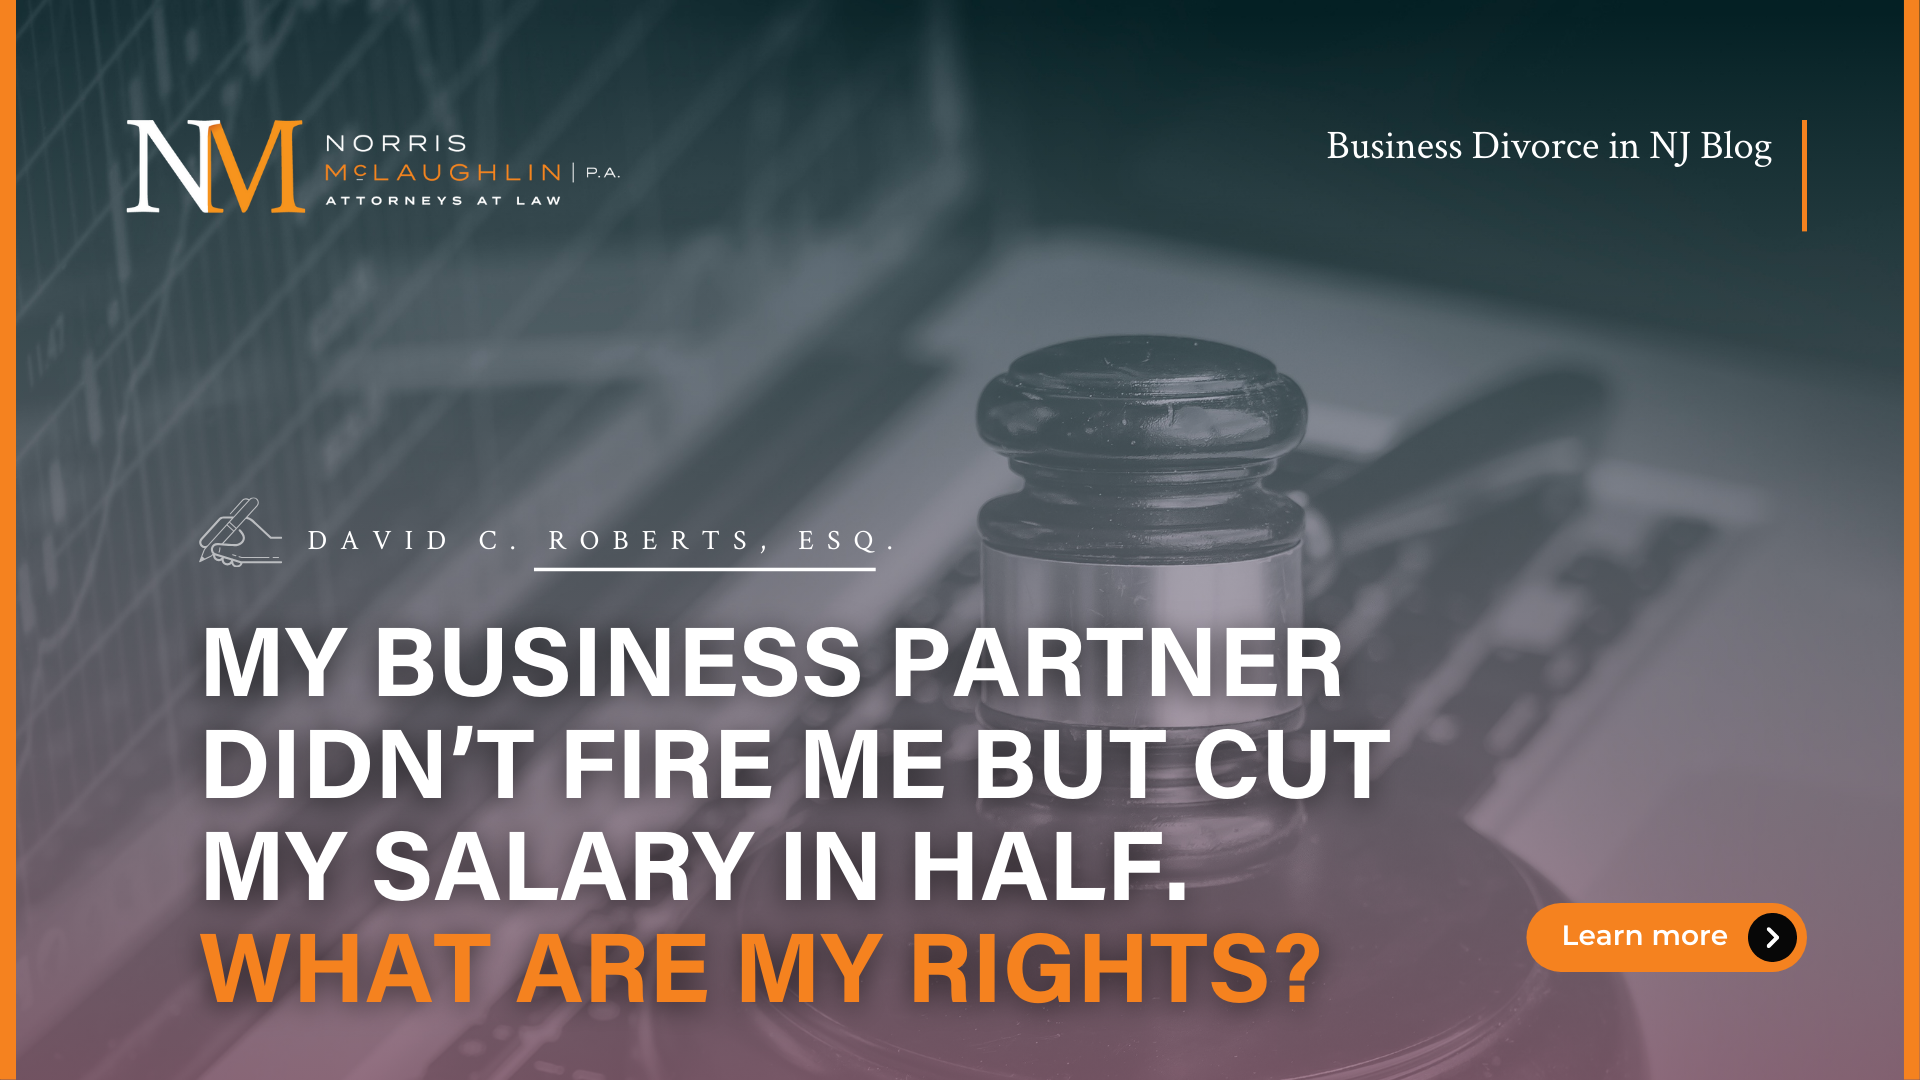 My Business Partner Didn’t Fire Me But Cut My Salary in Half.  What Are My Rights?